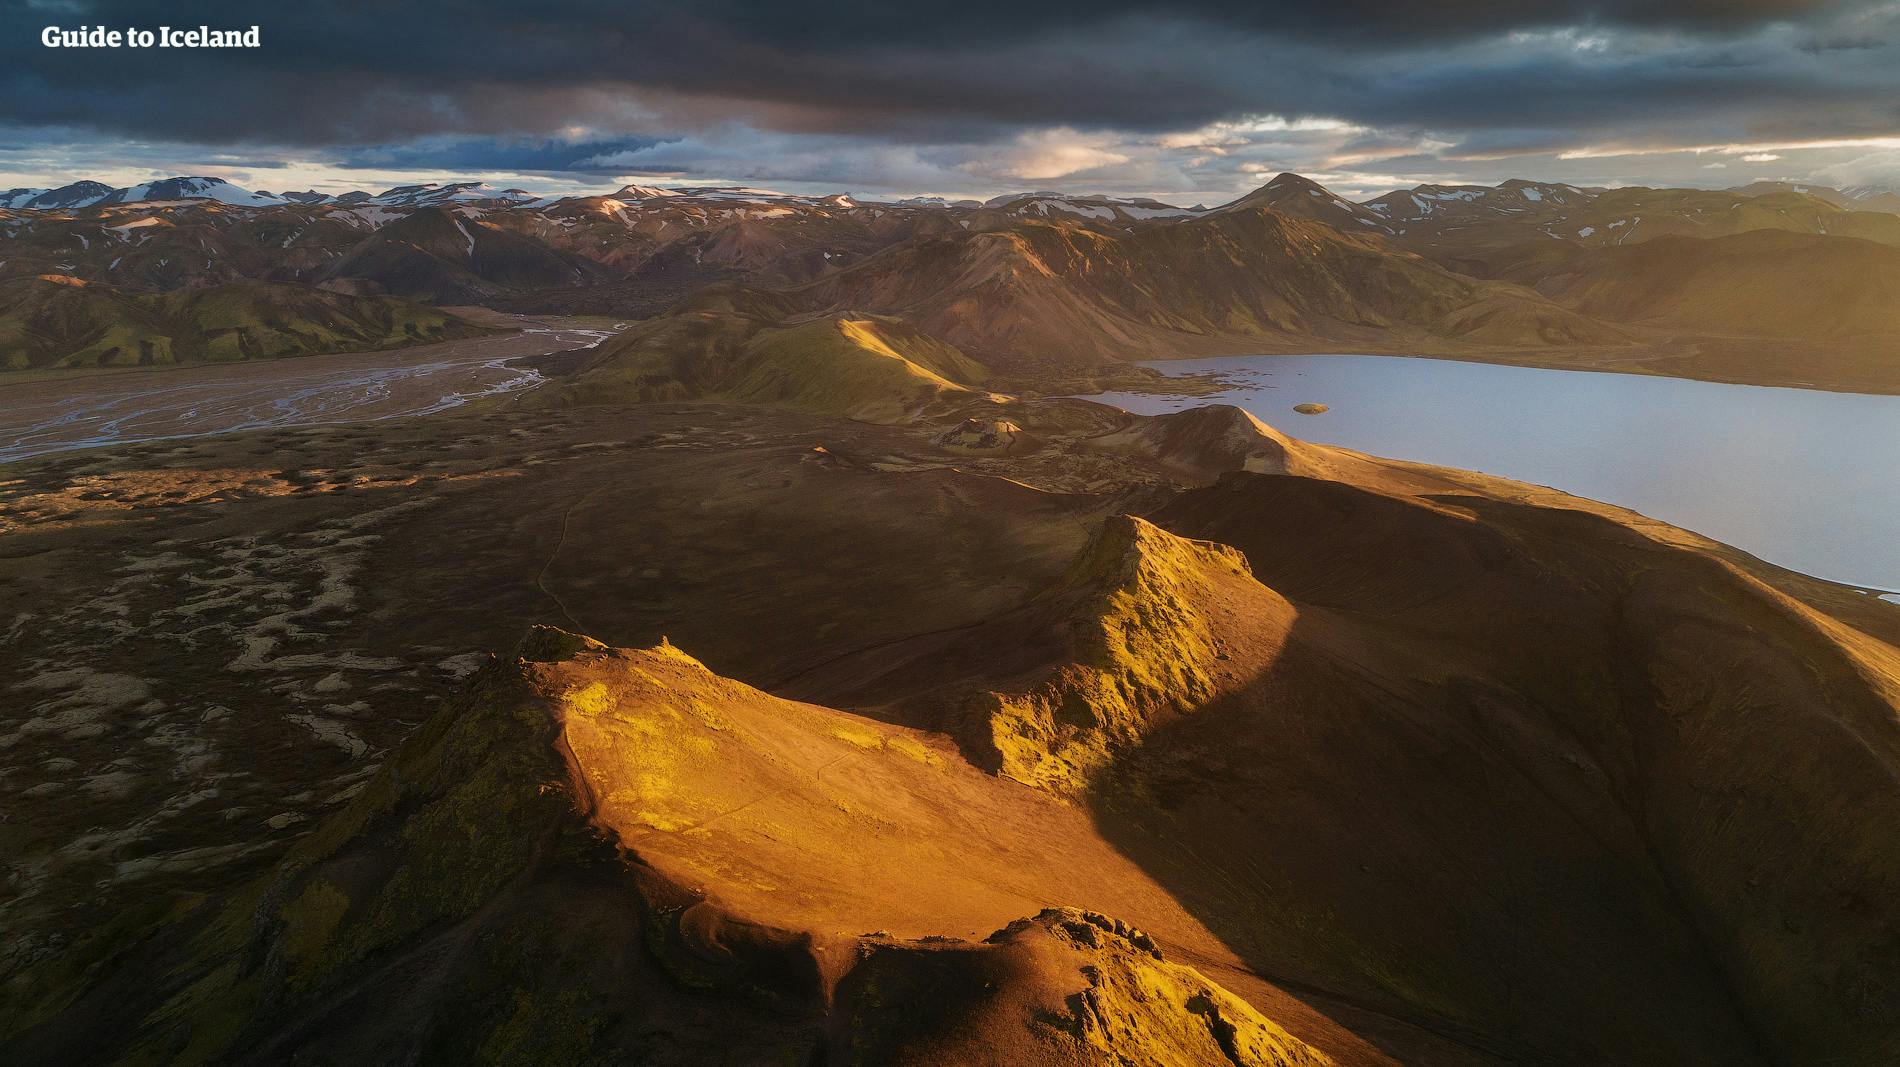 The mountains of the Icelandic Highlands.